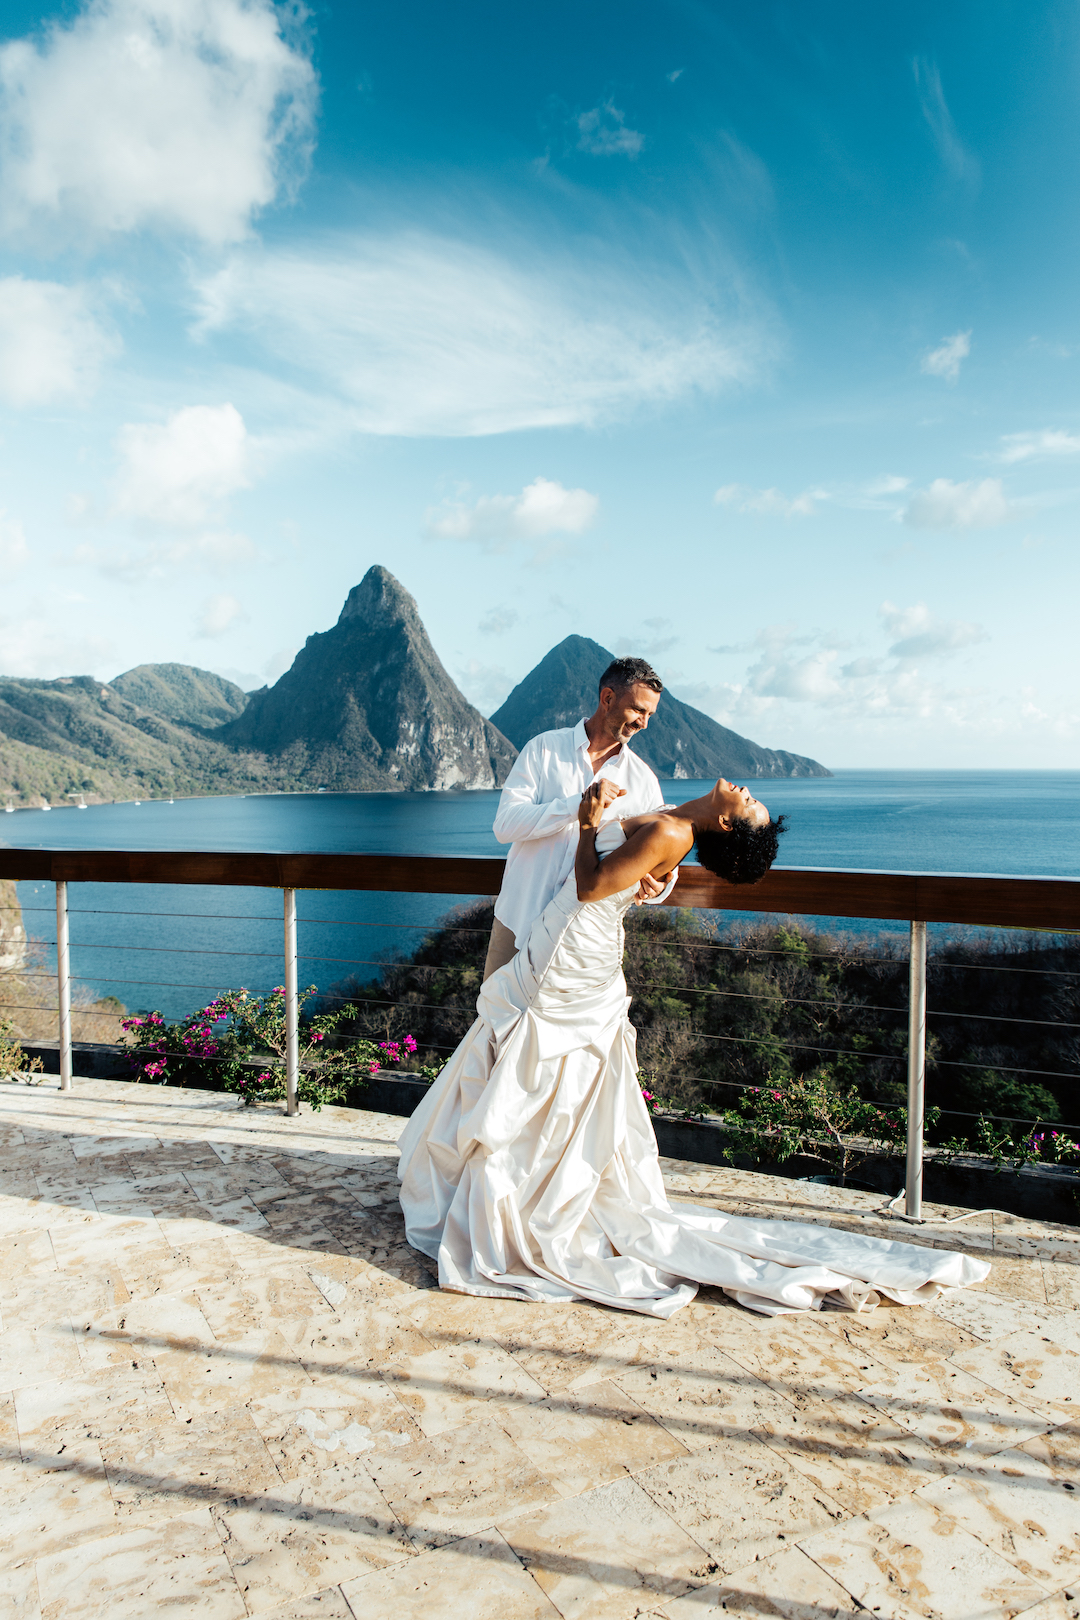 A groom tips his bride back and they are both laughing, against a backdrop of St Lucia's iconic mountains